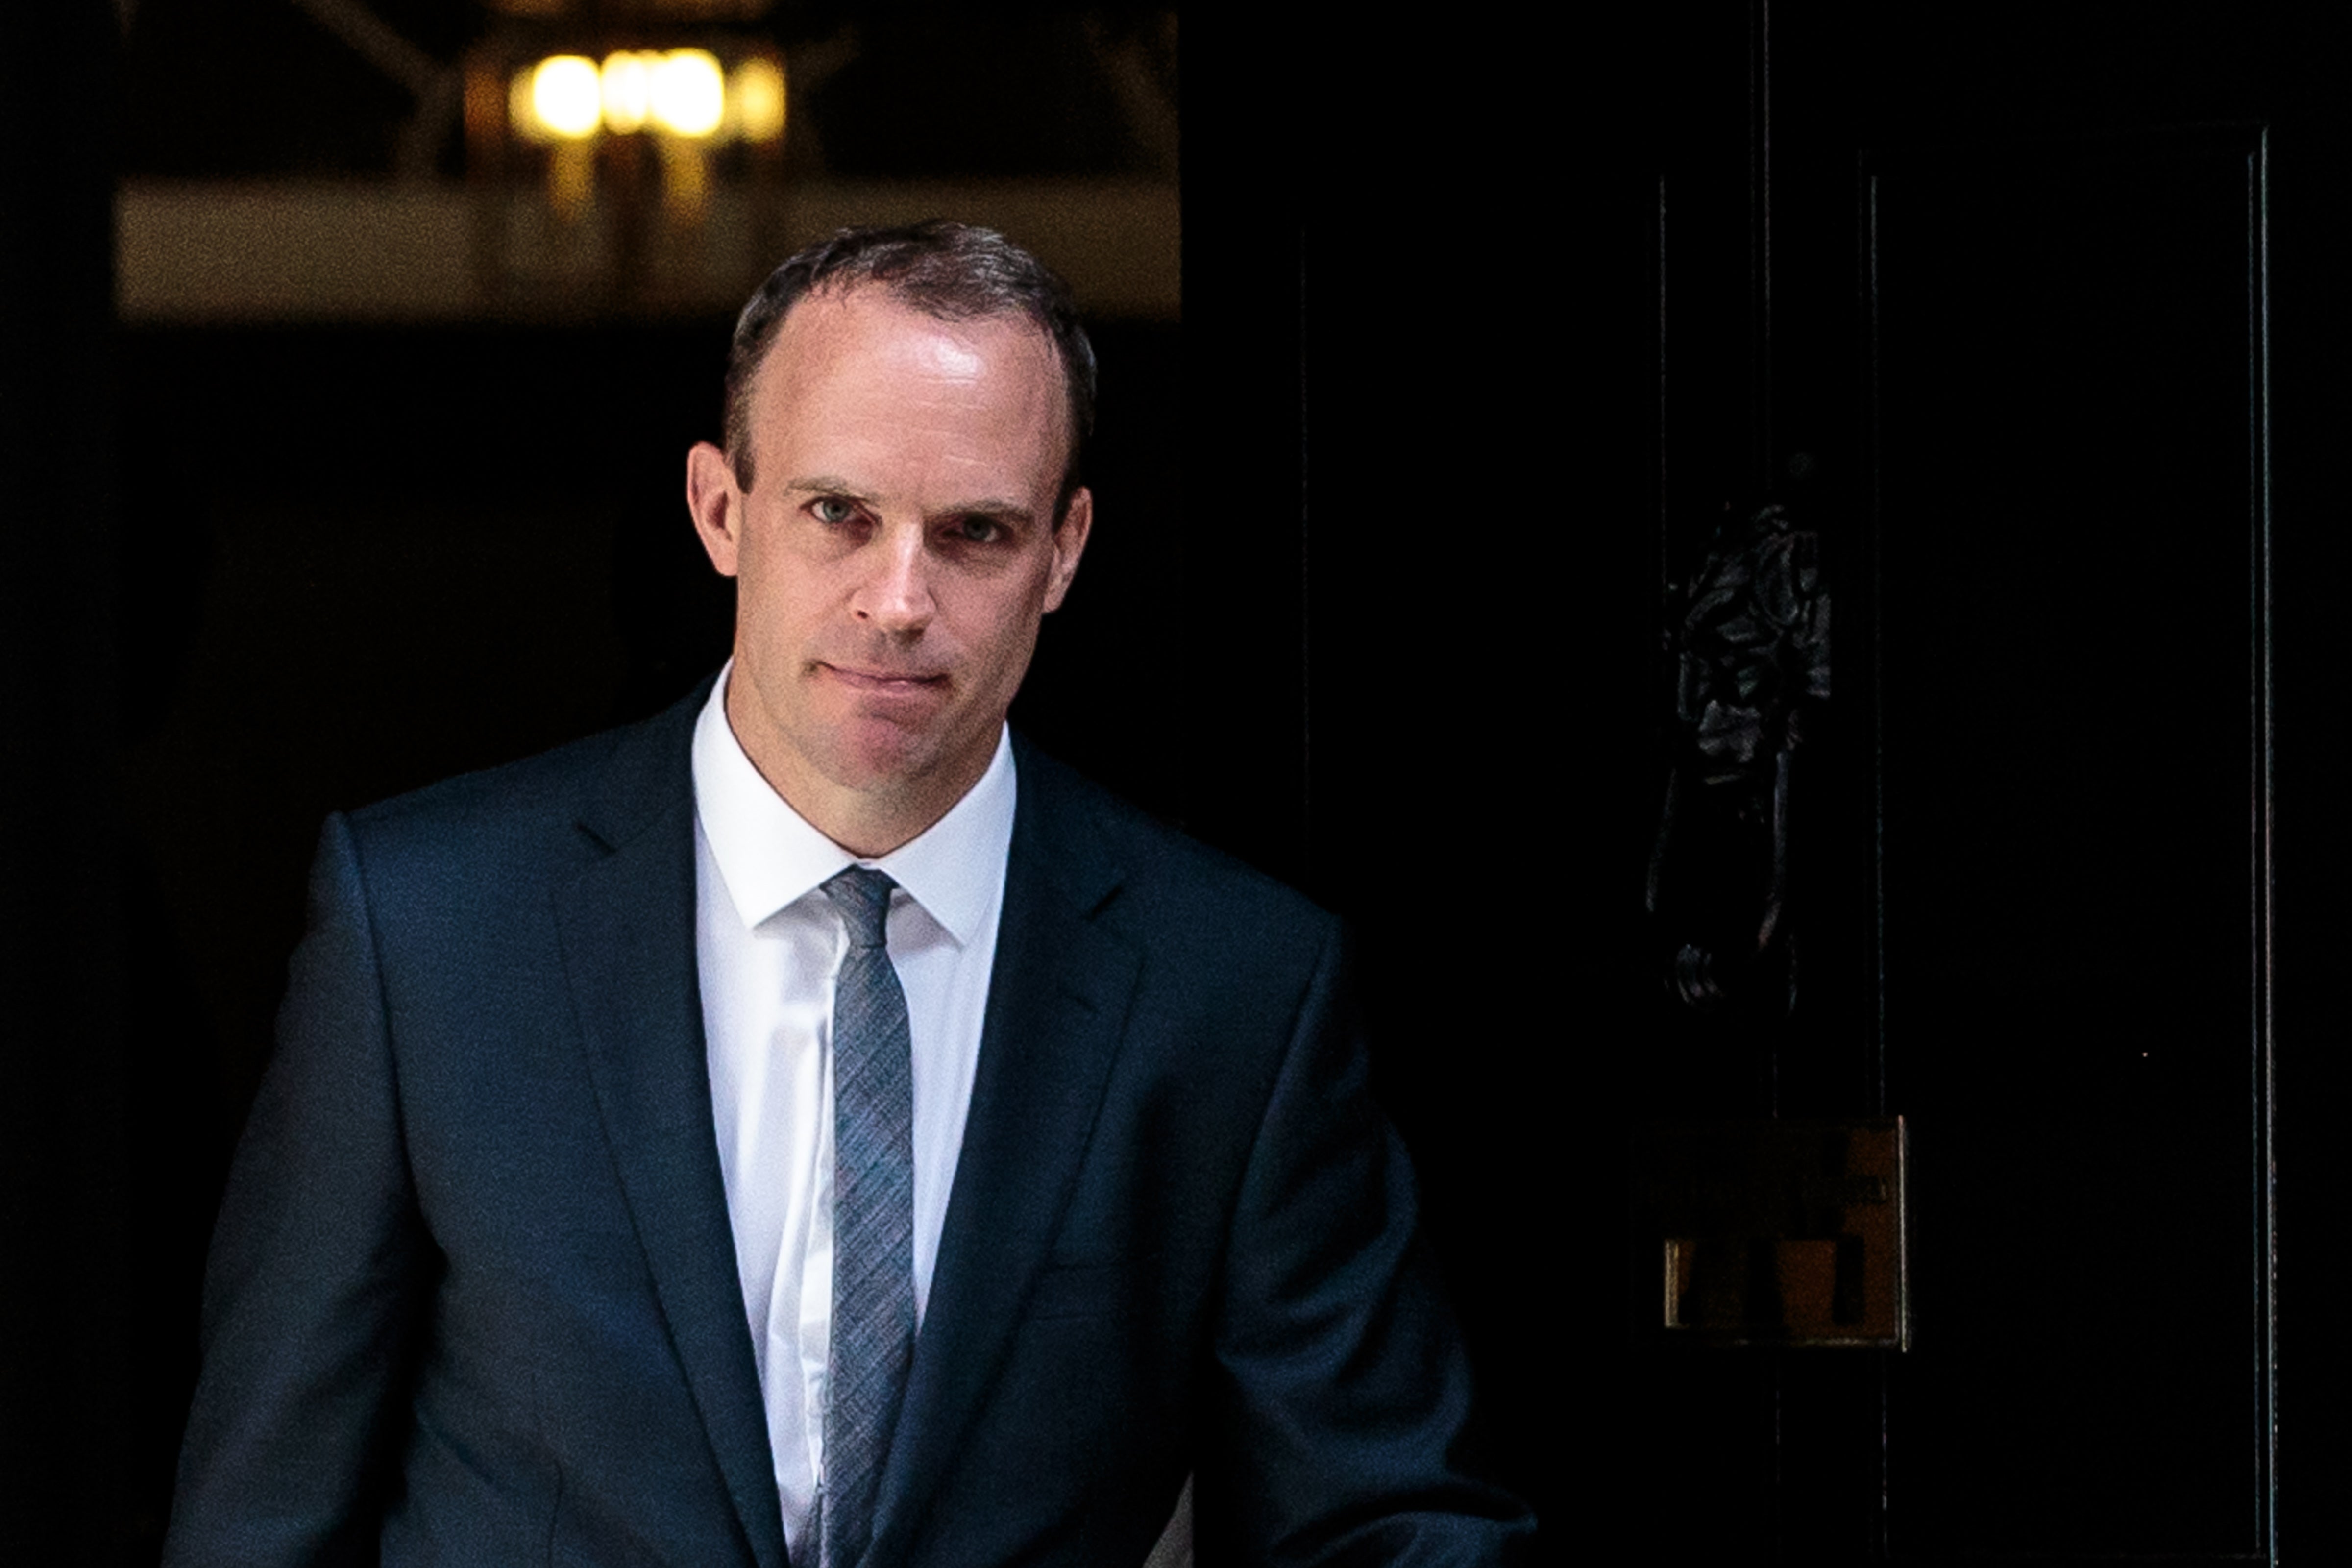 That so many complaints were made about Raab suggests there was no smoke without fire